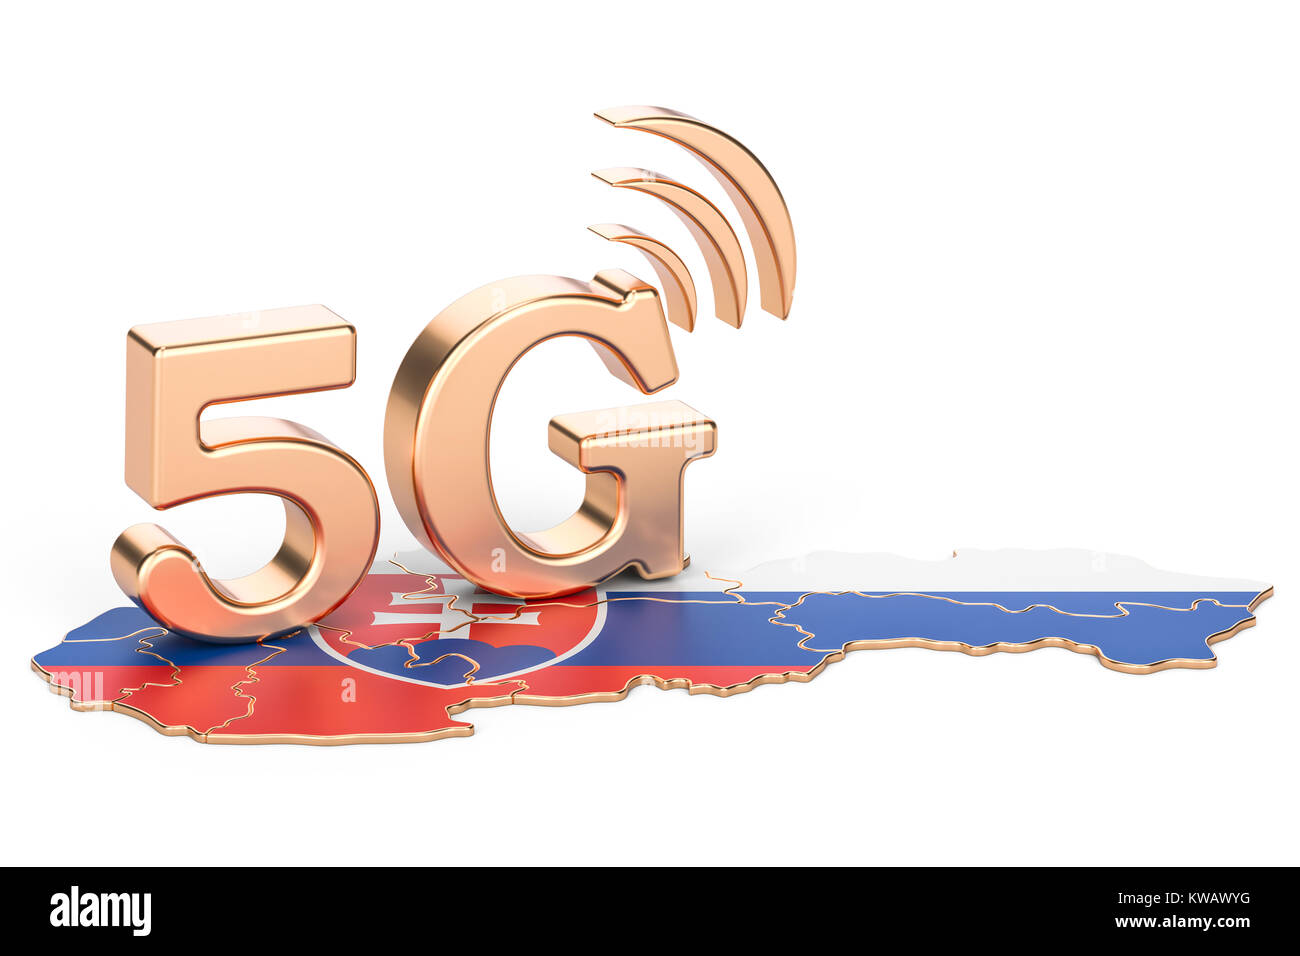 5G in Slovakia concept, 3D rendering isolated on white background Stock Photo